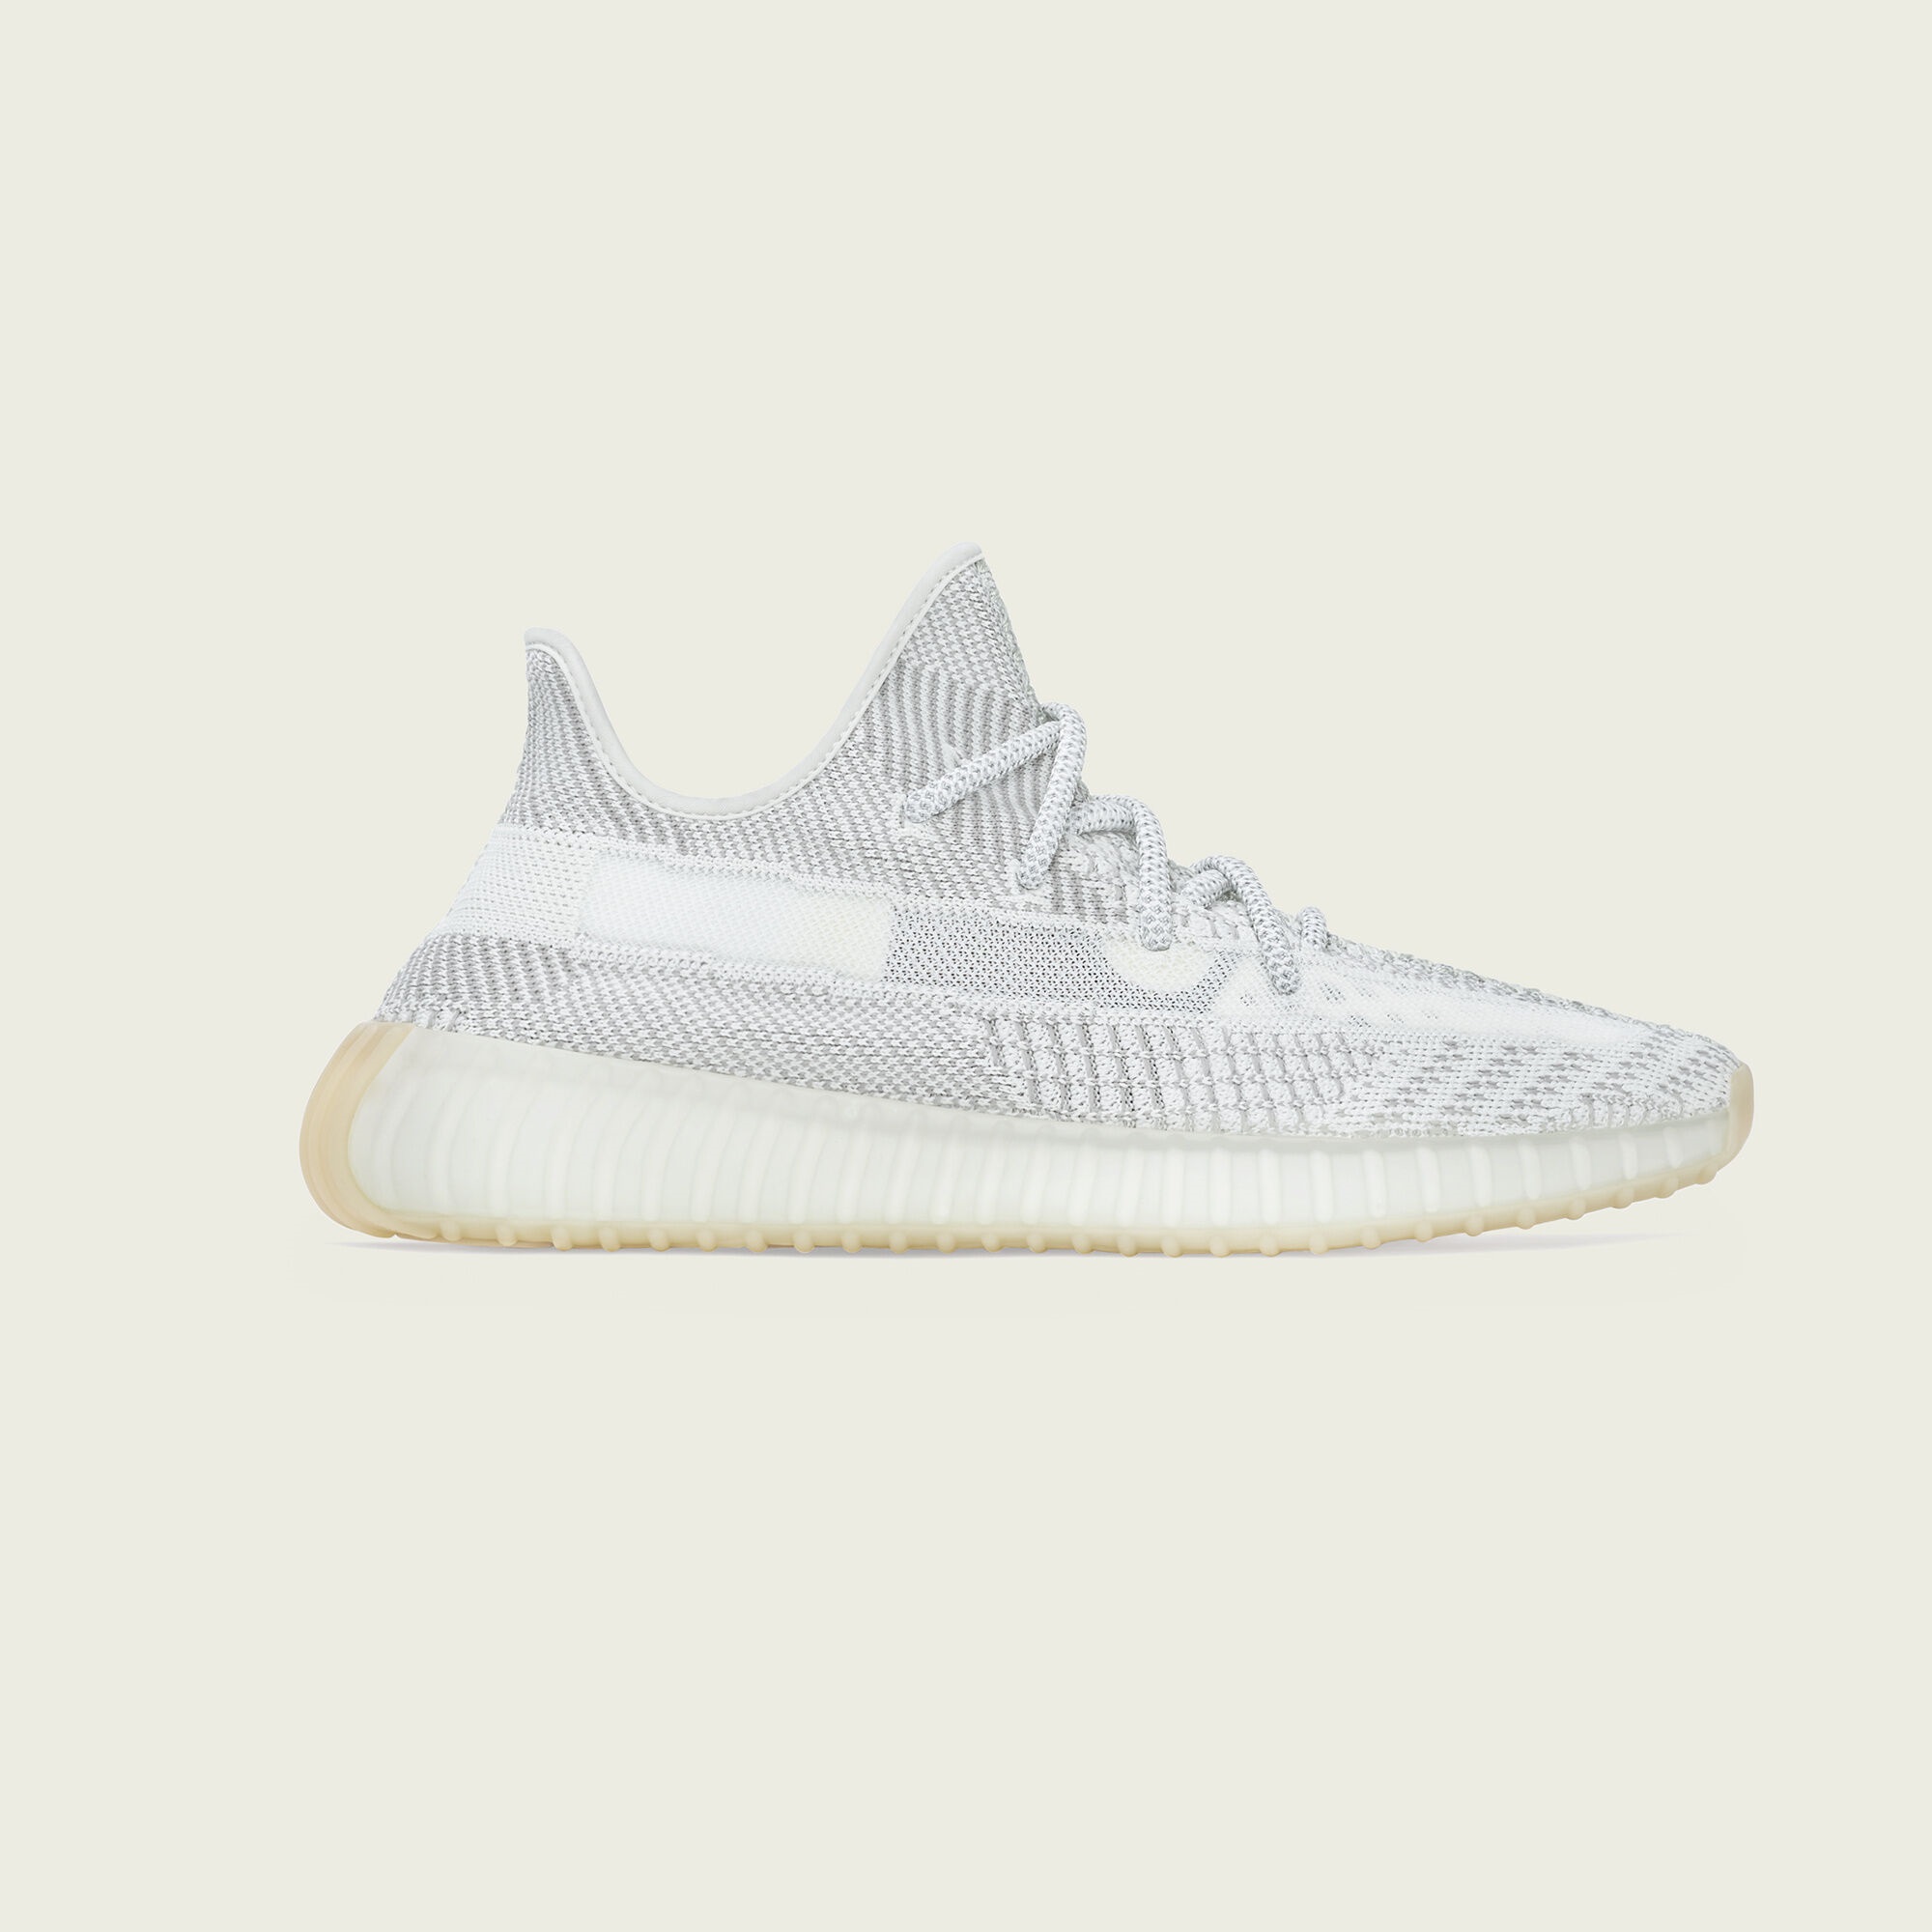 Official Look At The Adidas Yeezy Boost 350 V2 “Yeshaya”